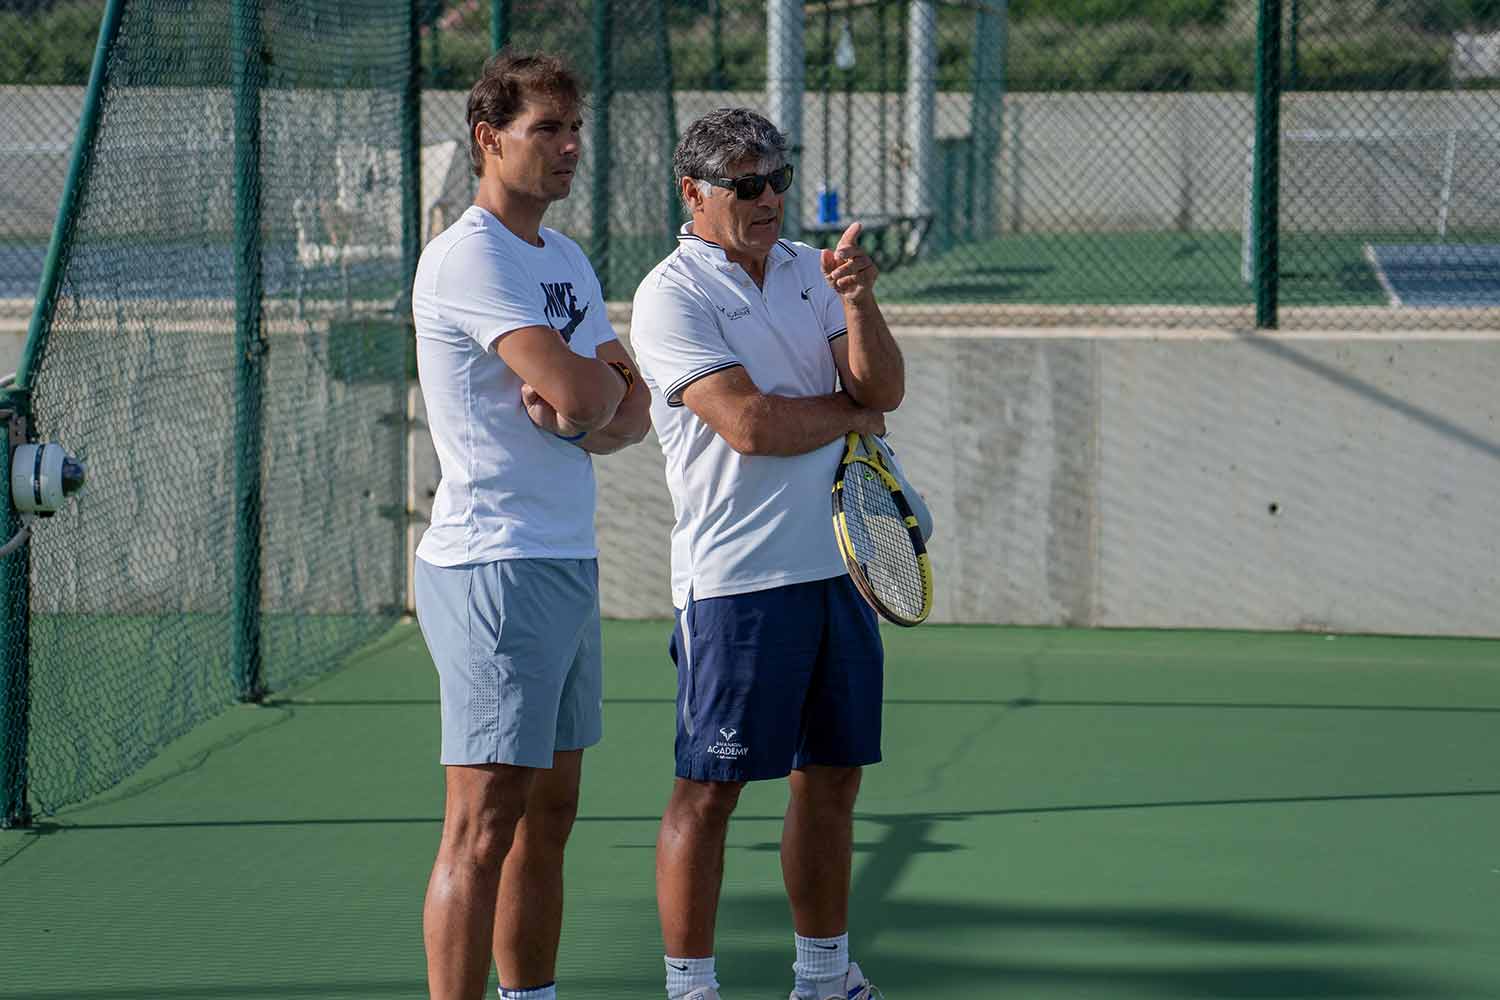 Rafa Nadal: “We have a vastly experienced team of coaches”